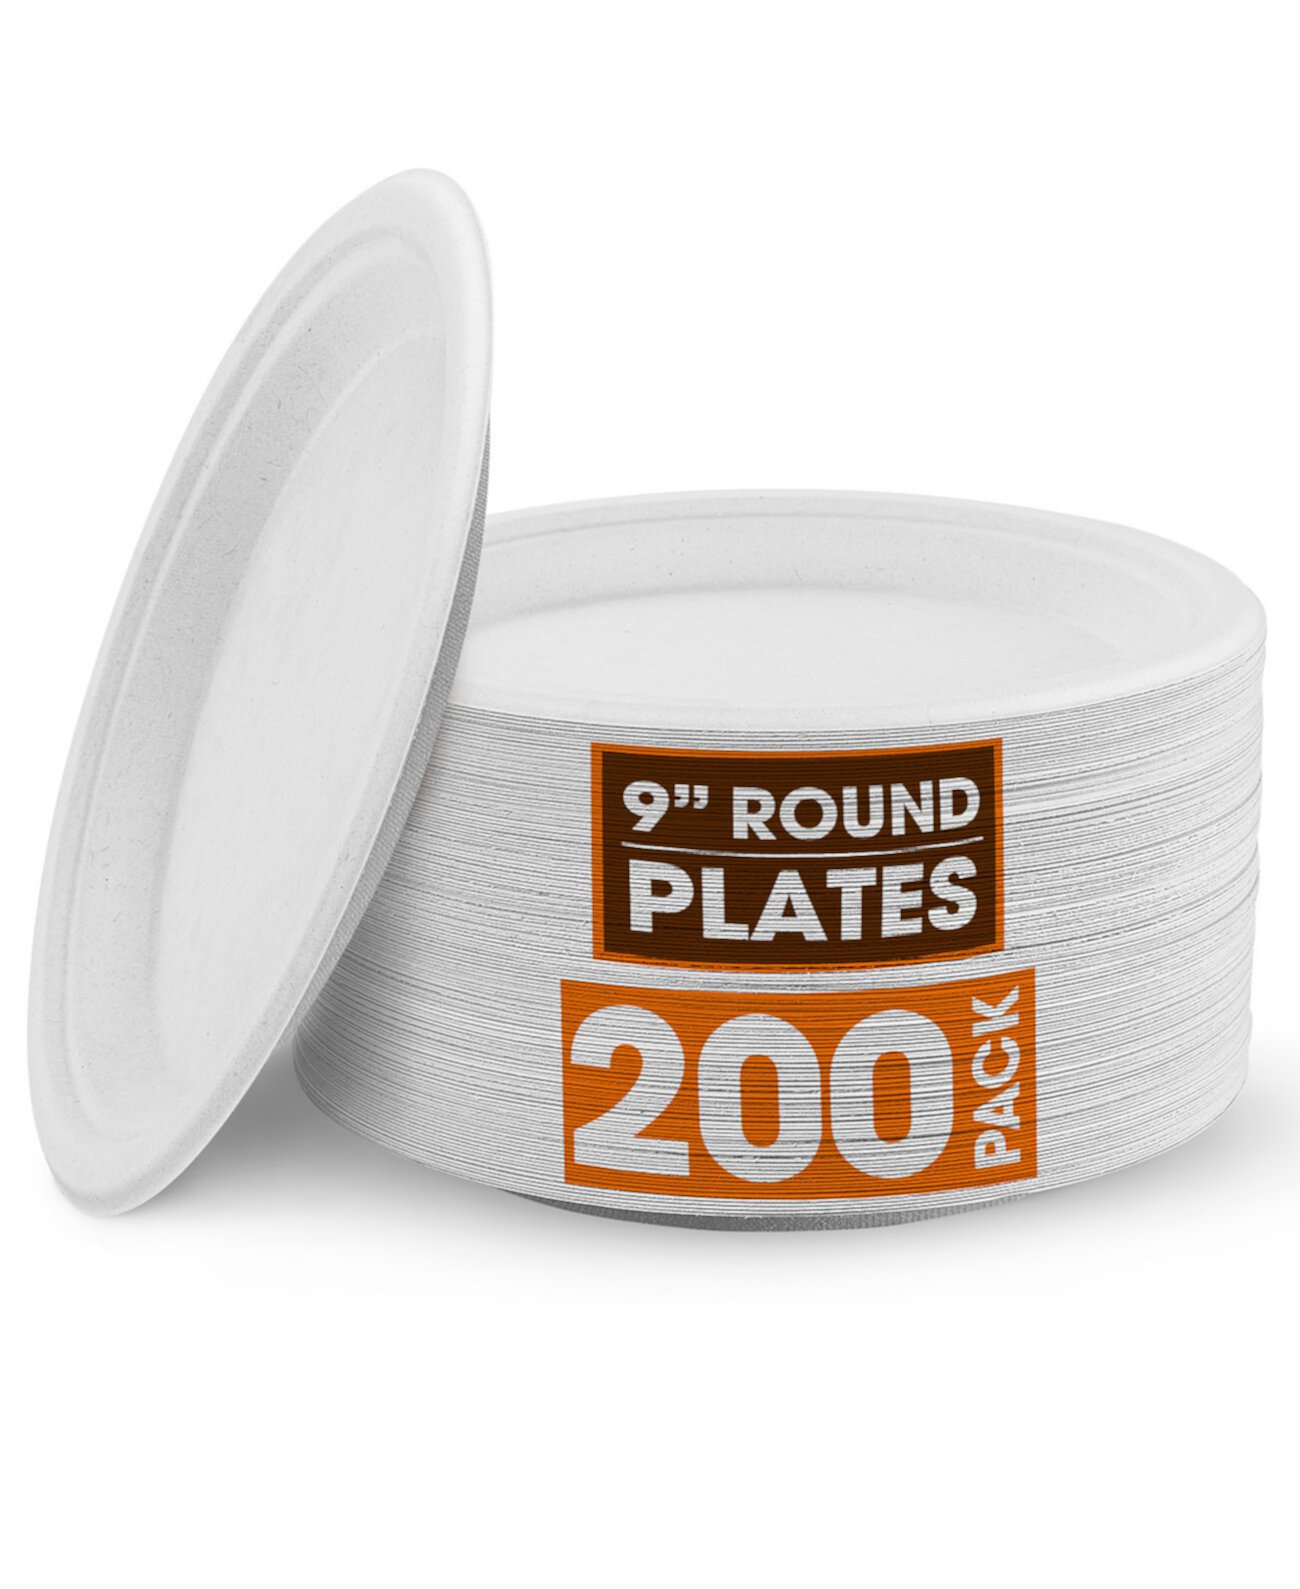 9 Inch Paper Plates, 200 Pack Cheer Collection